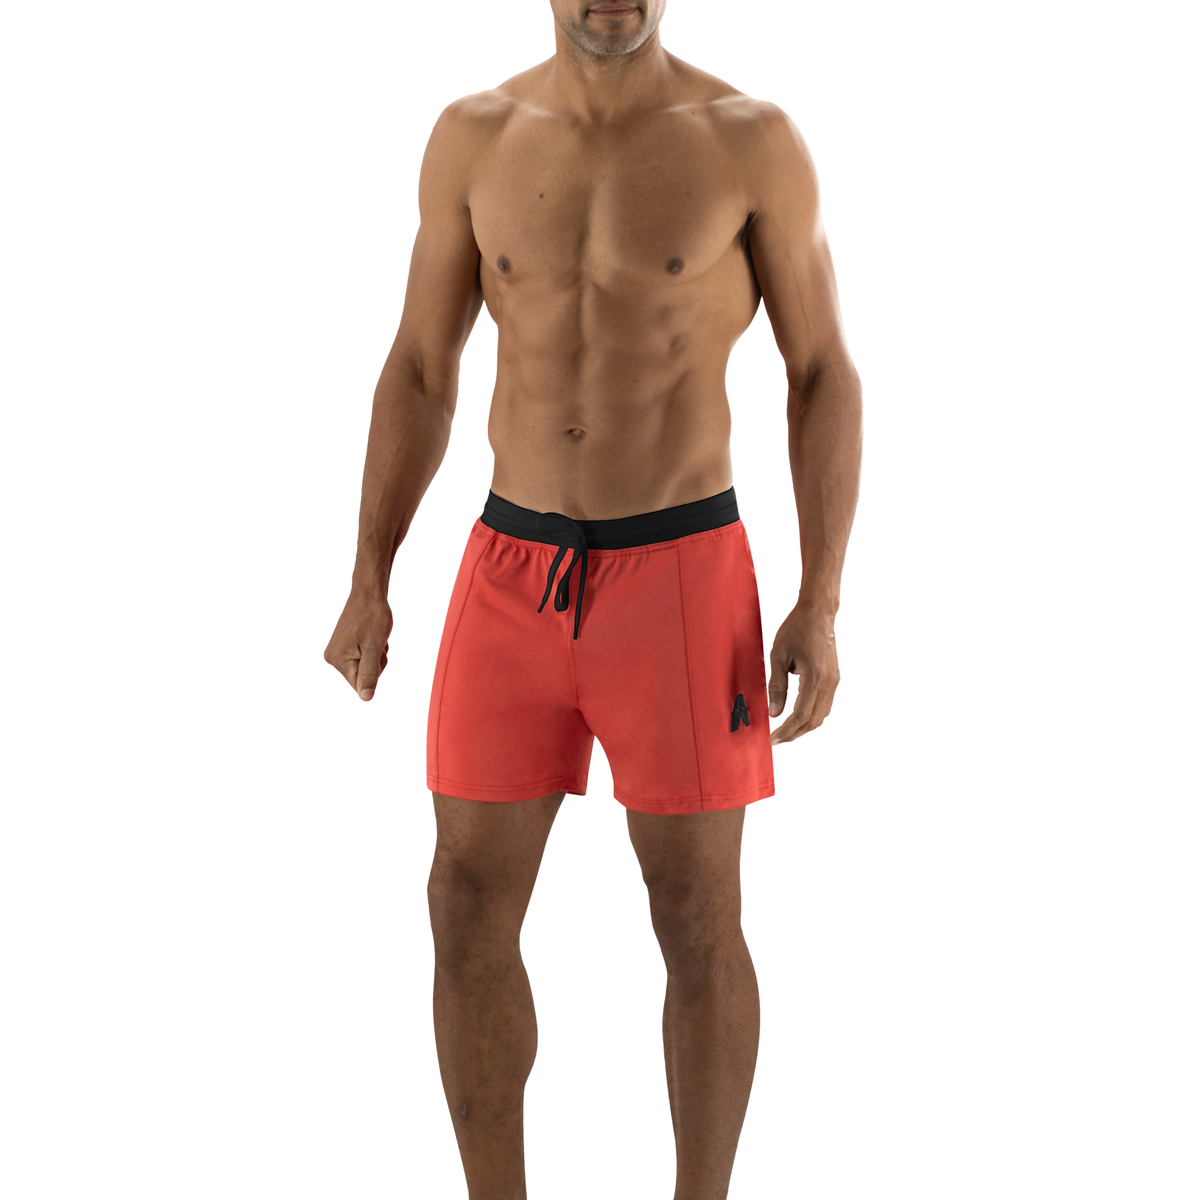 AirFlex Seamless Shorts - Red, Workout Shorts